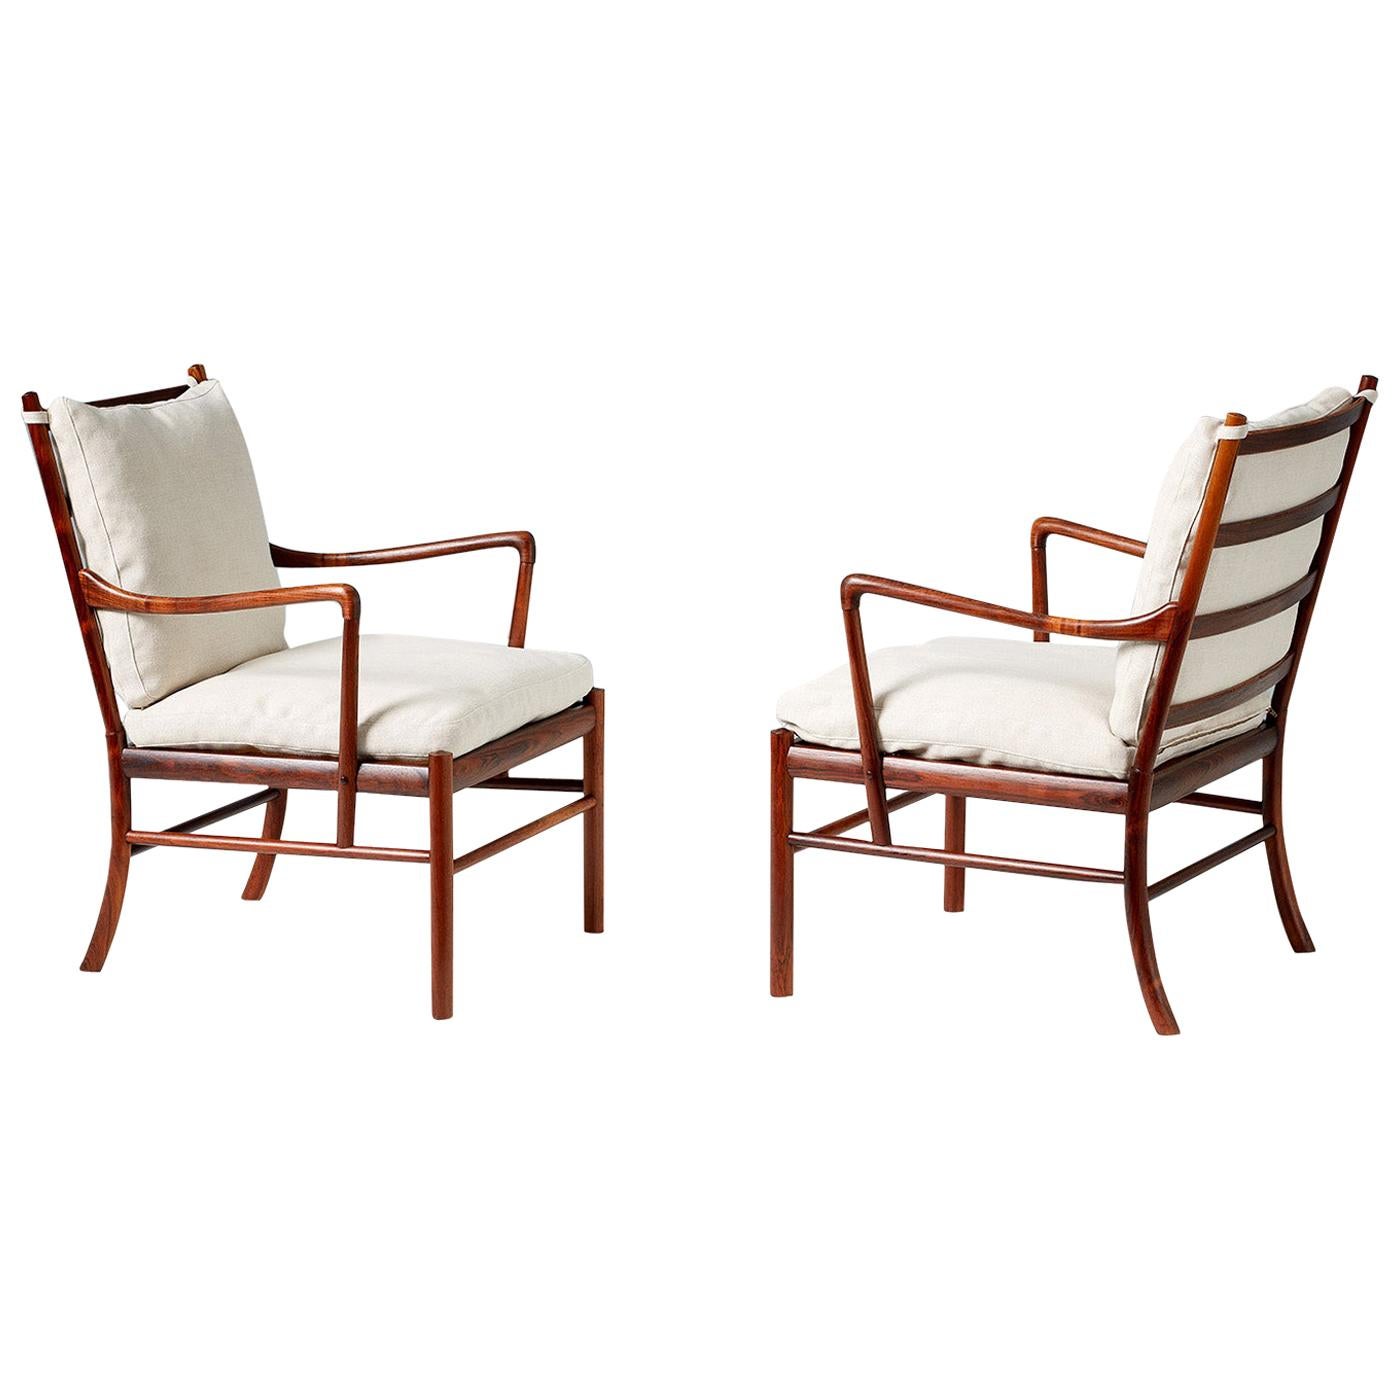 Ole Wanscher Pair of Vintage Rosewood Colonial Chairs, 1950s